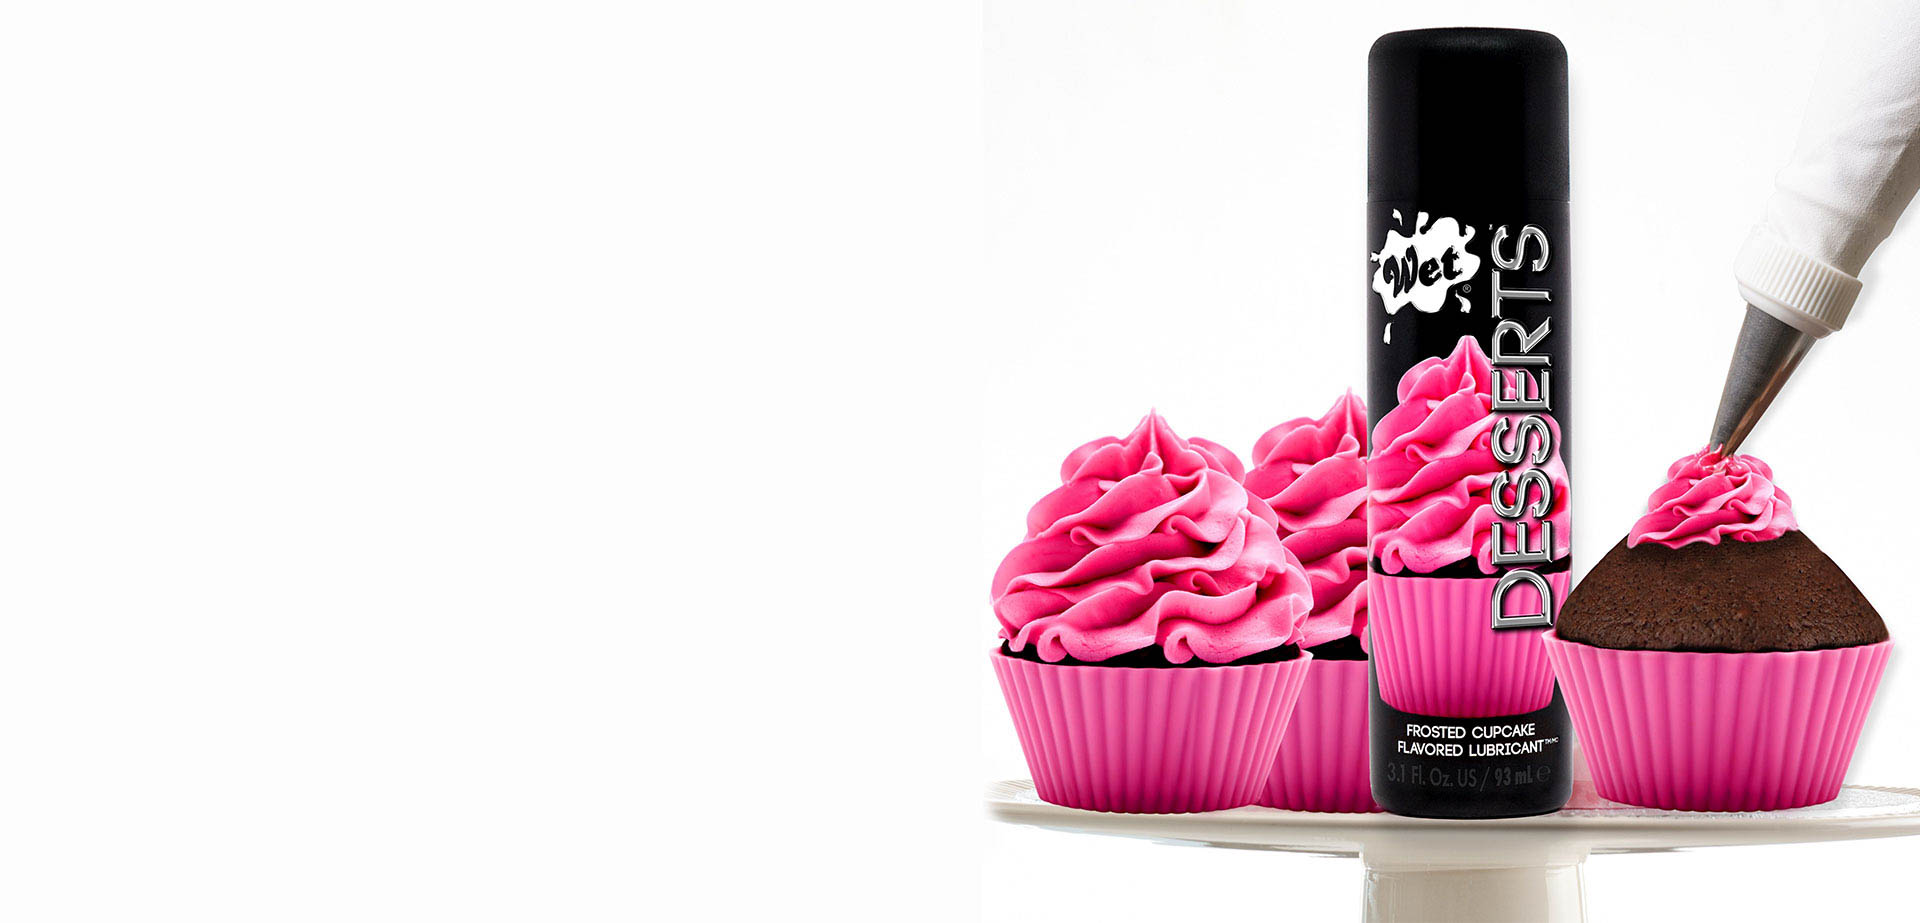 Cupcake Flavored Lubricant.